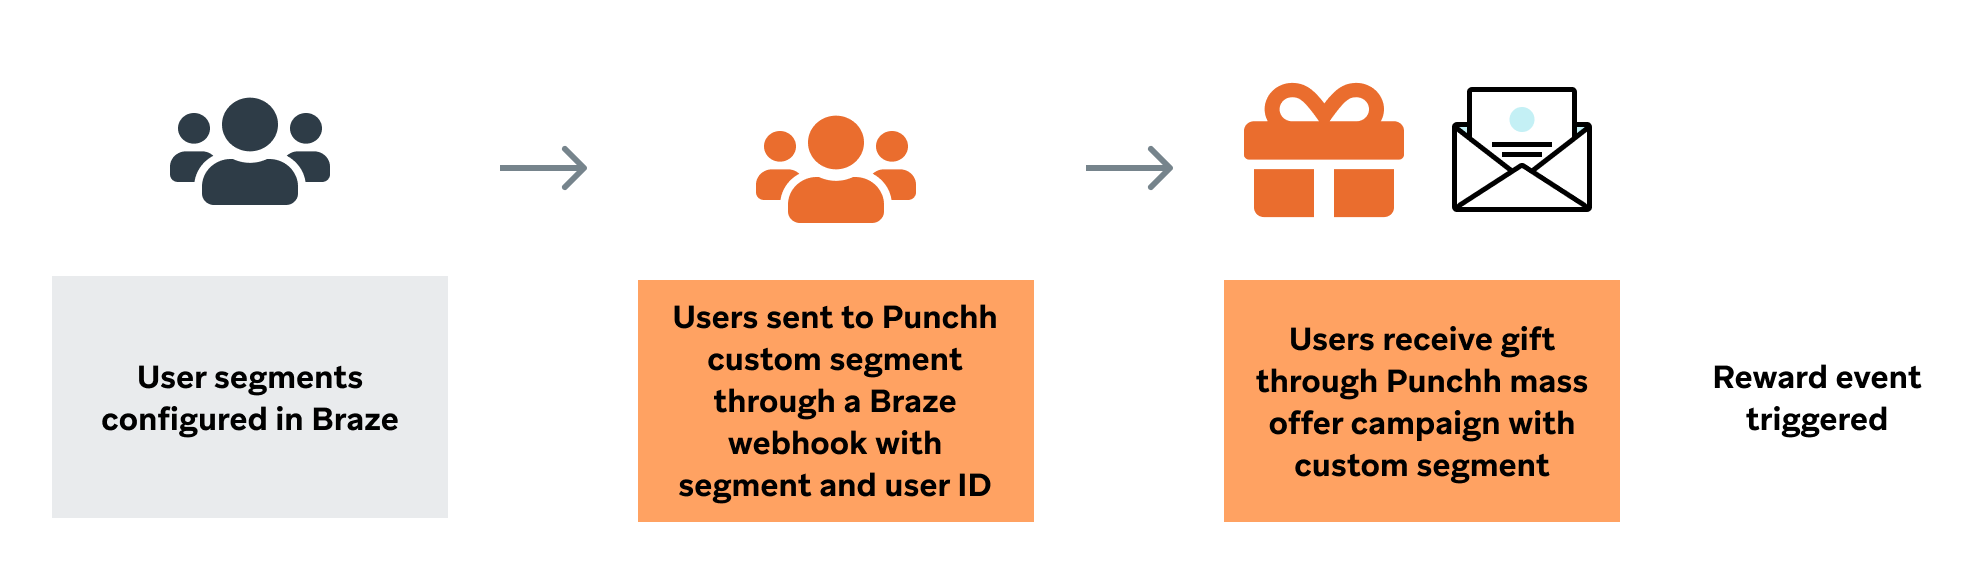 A user segment can be configured in Braze, and then a message can be sent from a Braze-to-Braze segment. Next, the users are sent to the Punchh custom segment through a Braze webhook with segment and user ID. After this, the user receives a gift through Punchh mass offer campaign with a custom segment. After this the reward event is triggered.